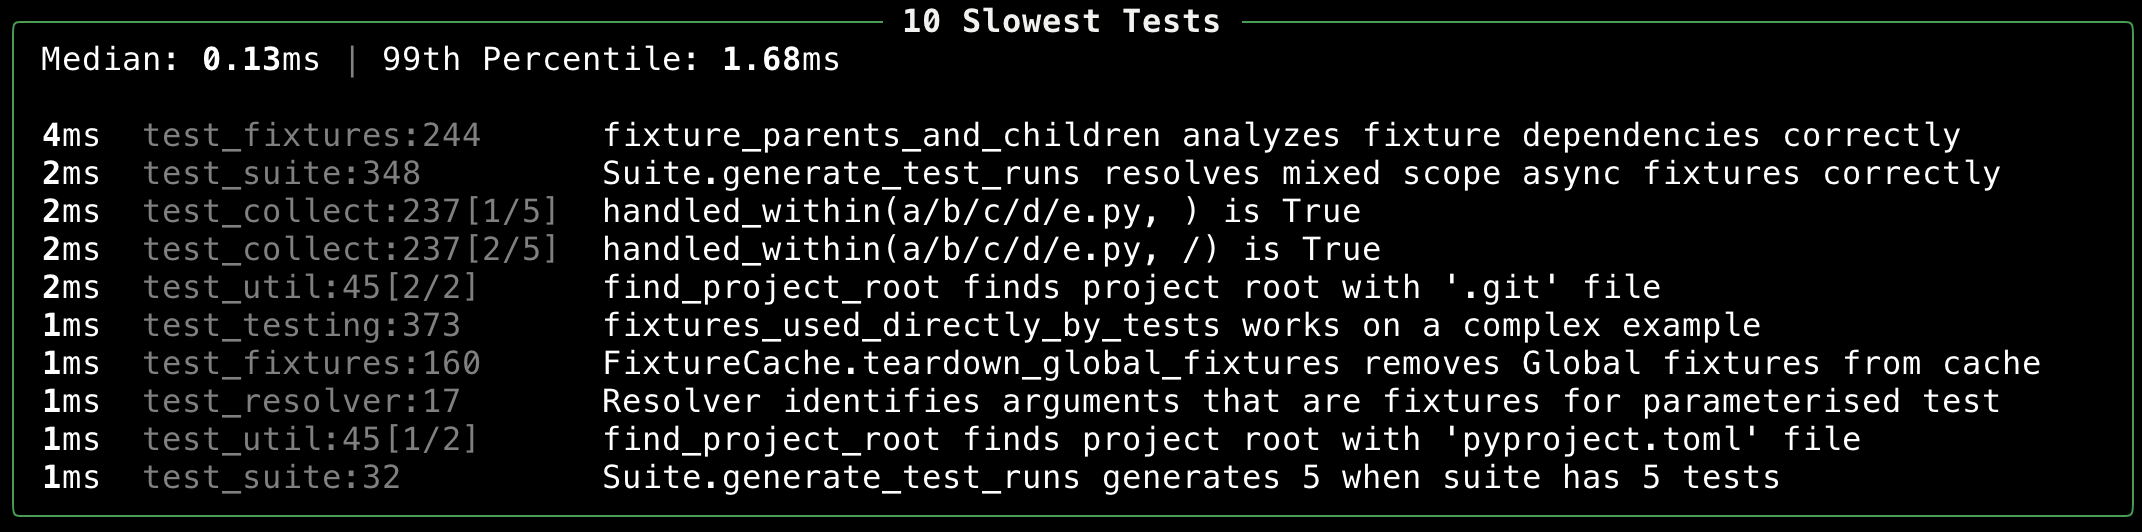 The output for the slowest tests